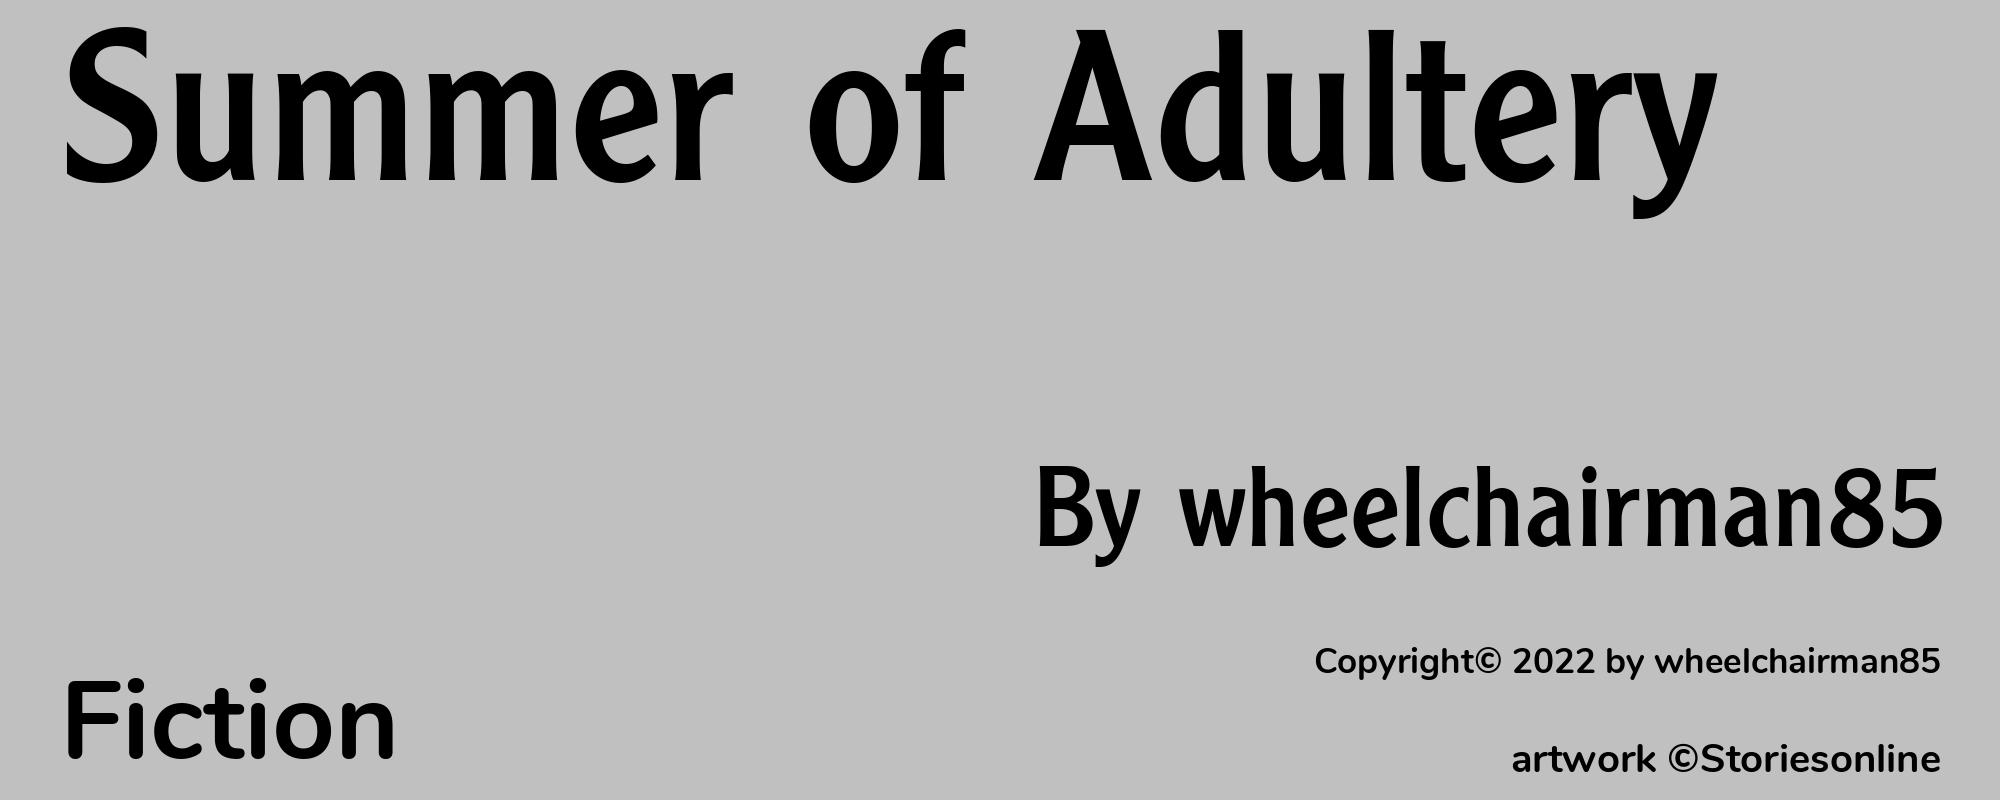 Summer of Adultery - Cover